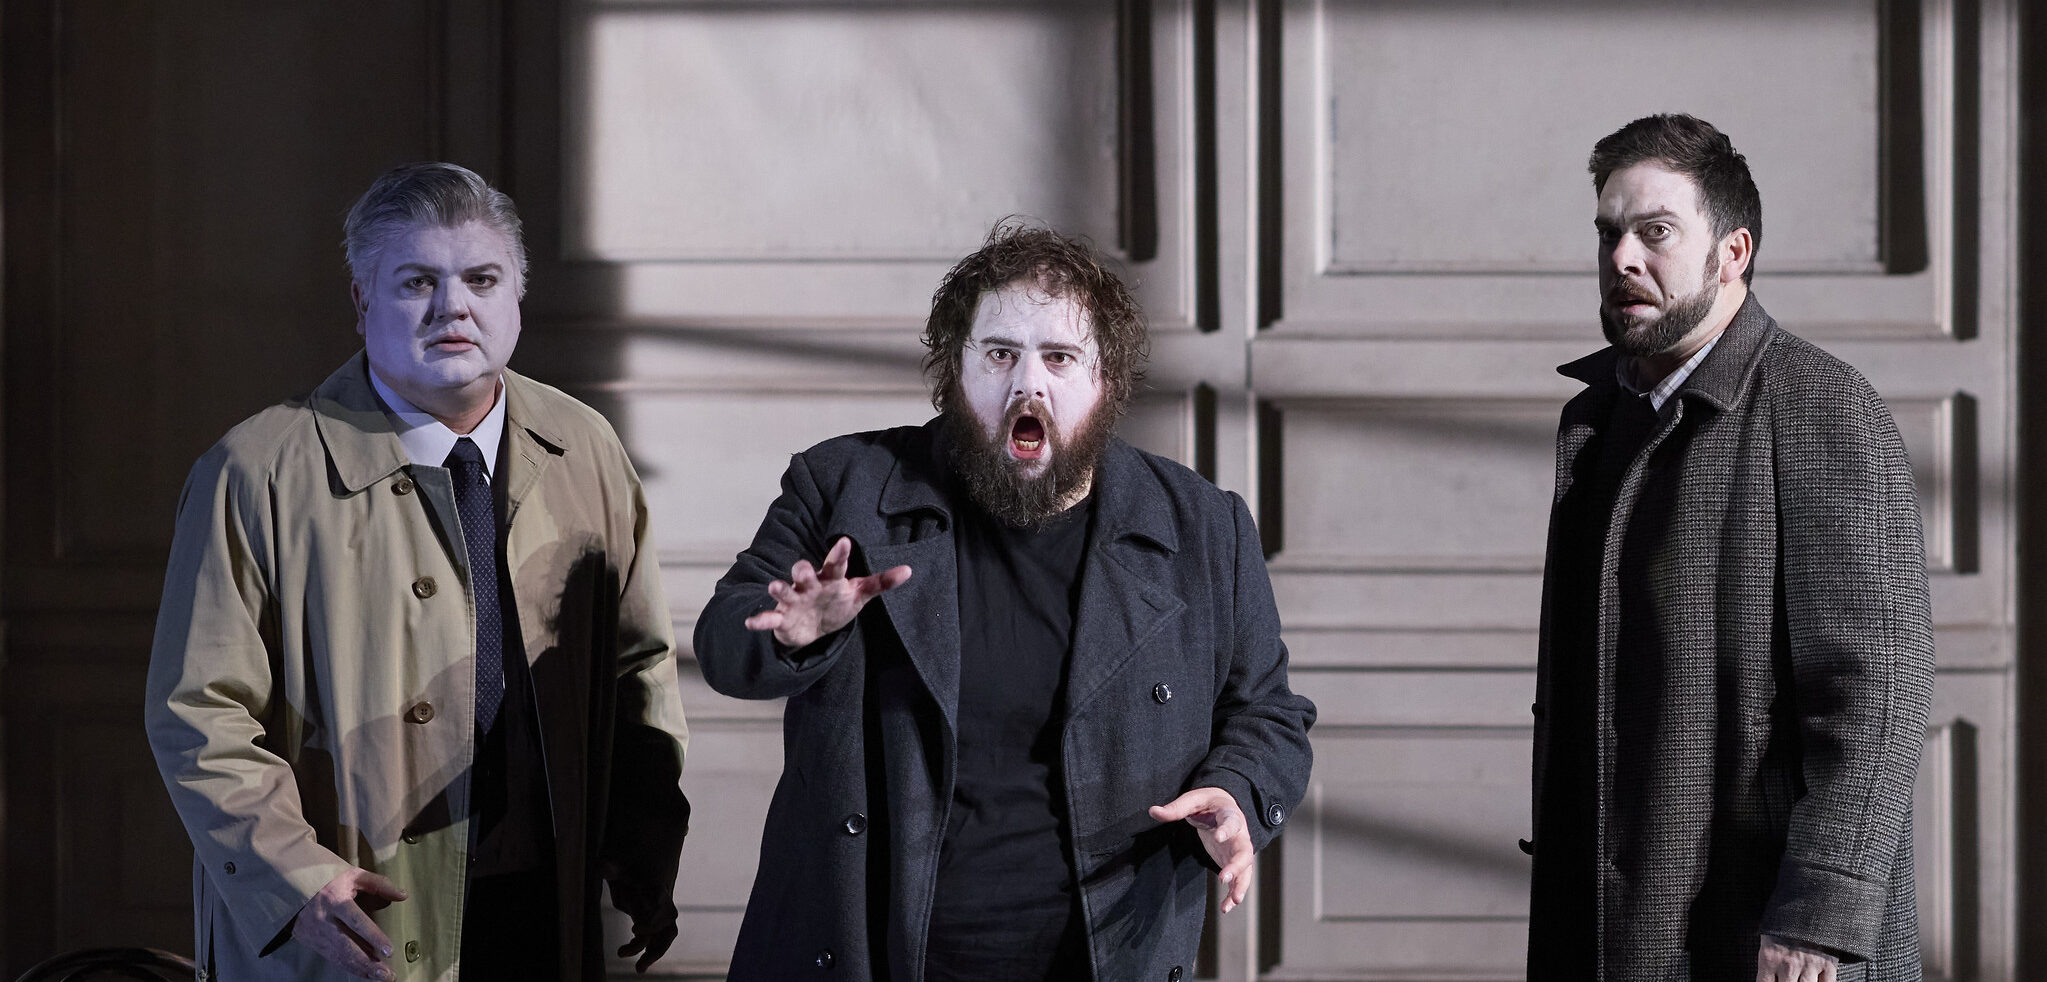 ‘Hamlet’ by Opera Australia is a captivating take on a classic